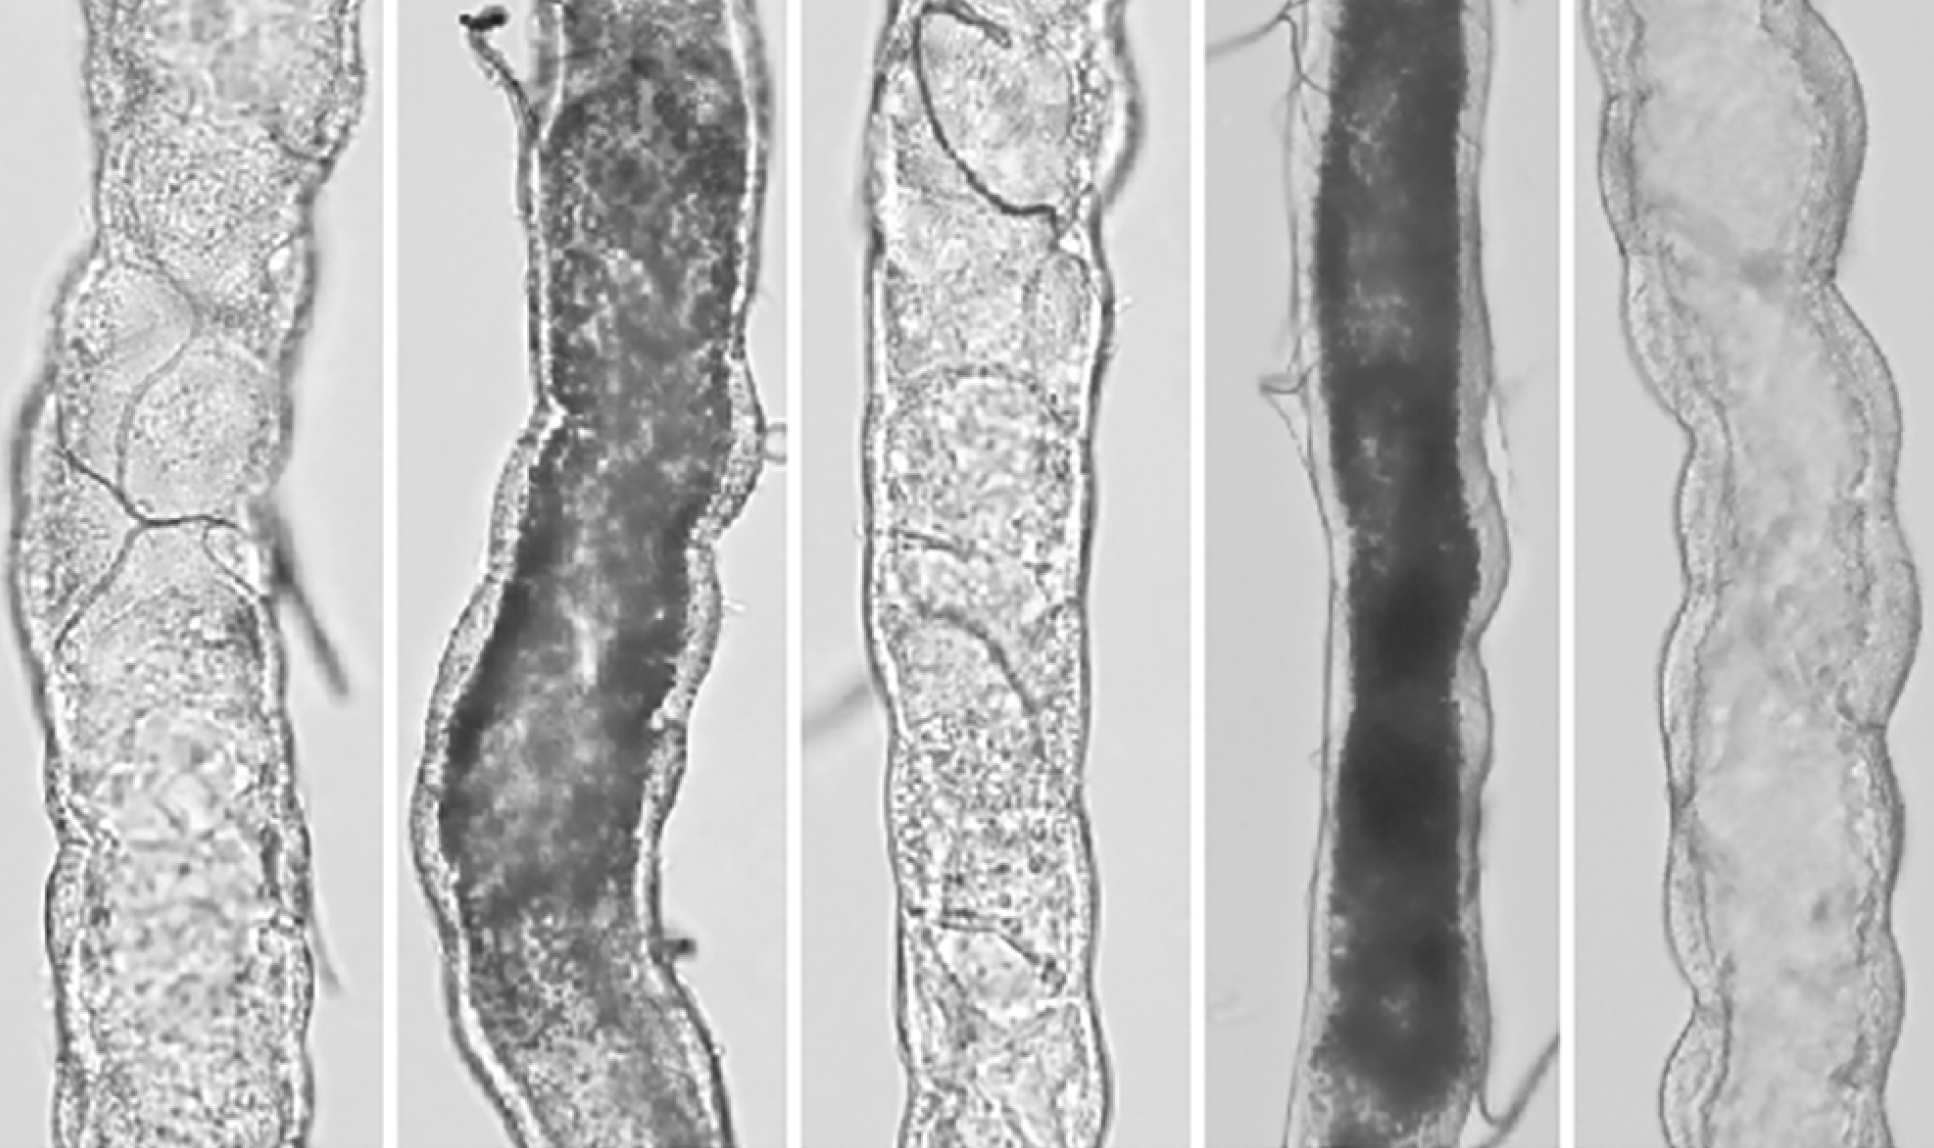 Montage of dissected fly renal tubules, alternating clear and dark, showing accumulation of uric acid crystals (dark) induced by chronic high-sugar feeding.